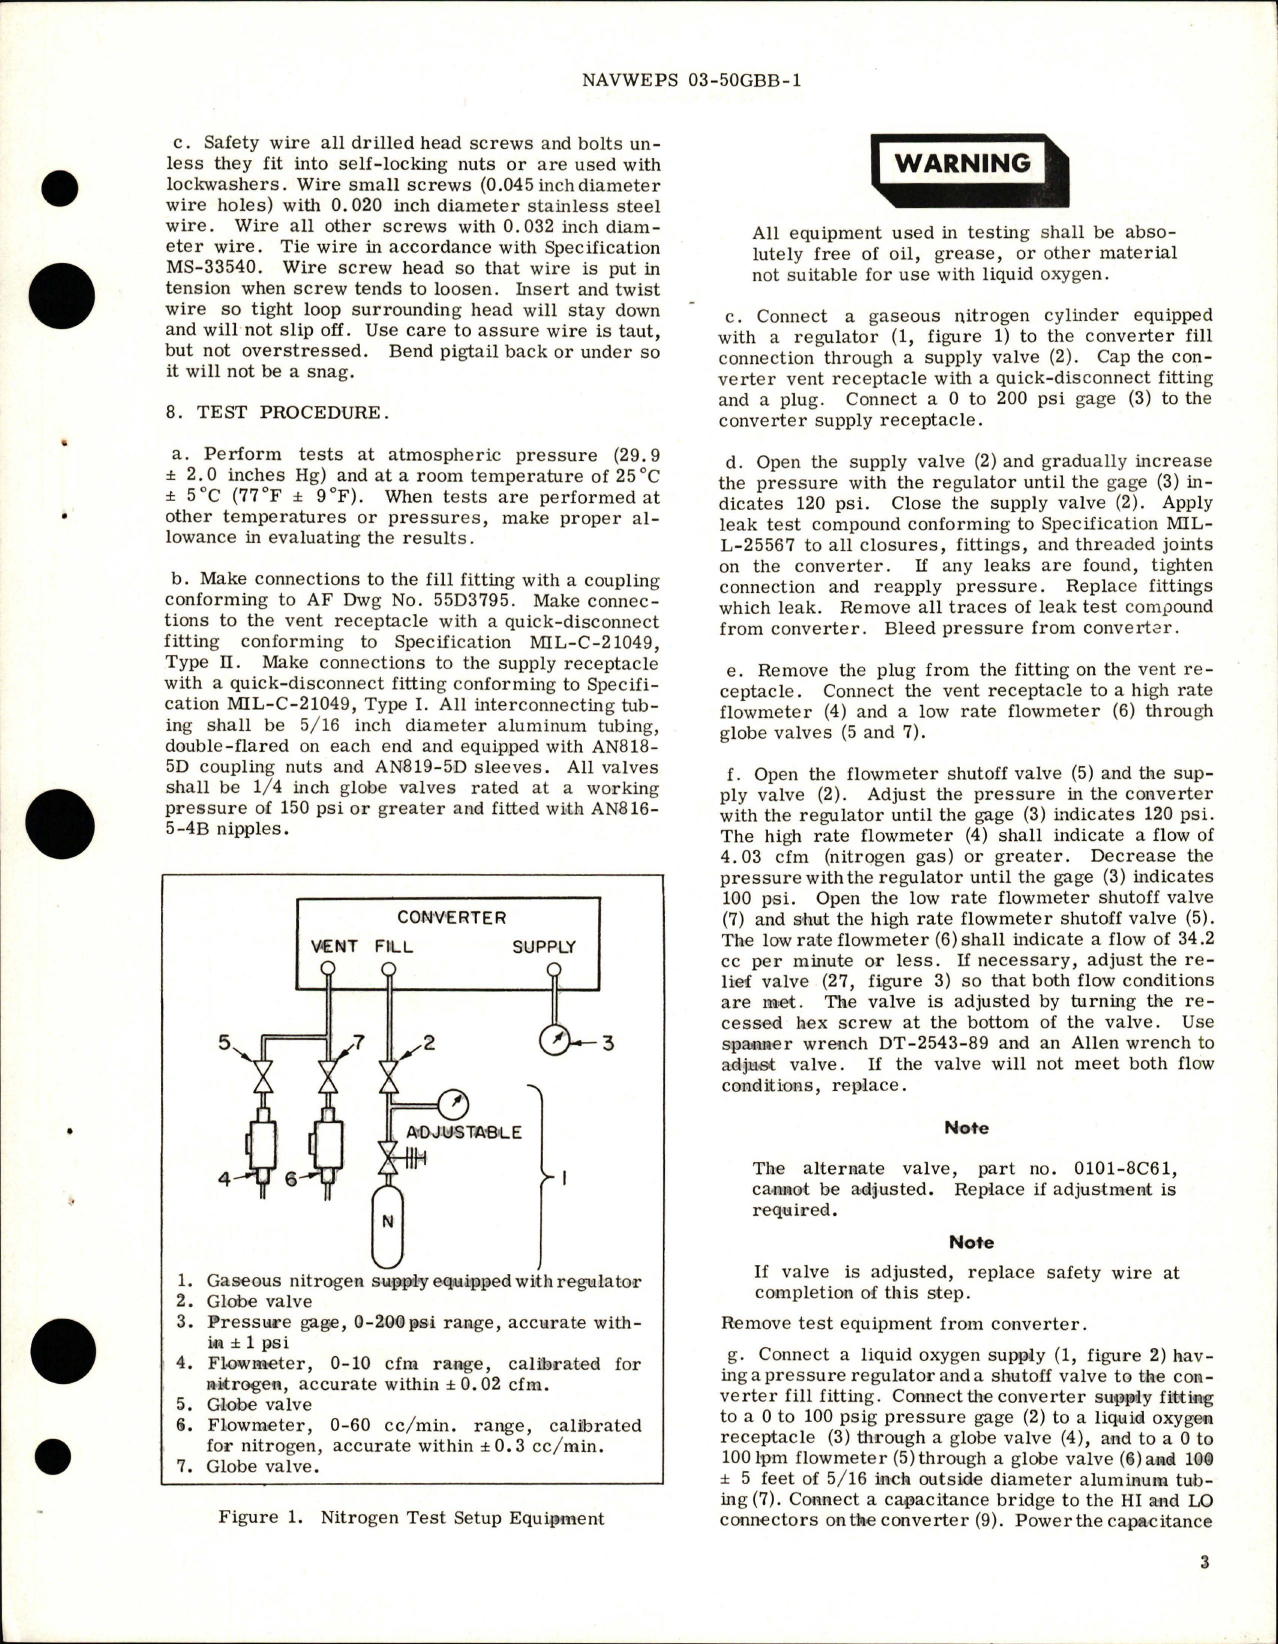 Sample page 5 from AirCorps Library document: Overhaul Instructions for Empennage De-Icer Control - Part 1035040-1